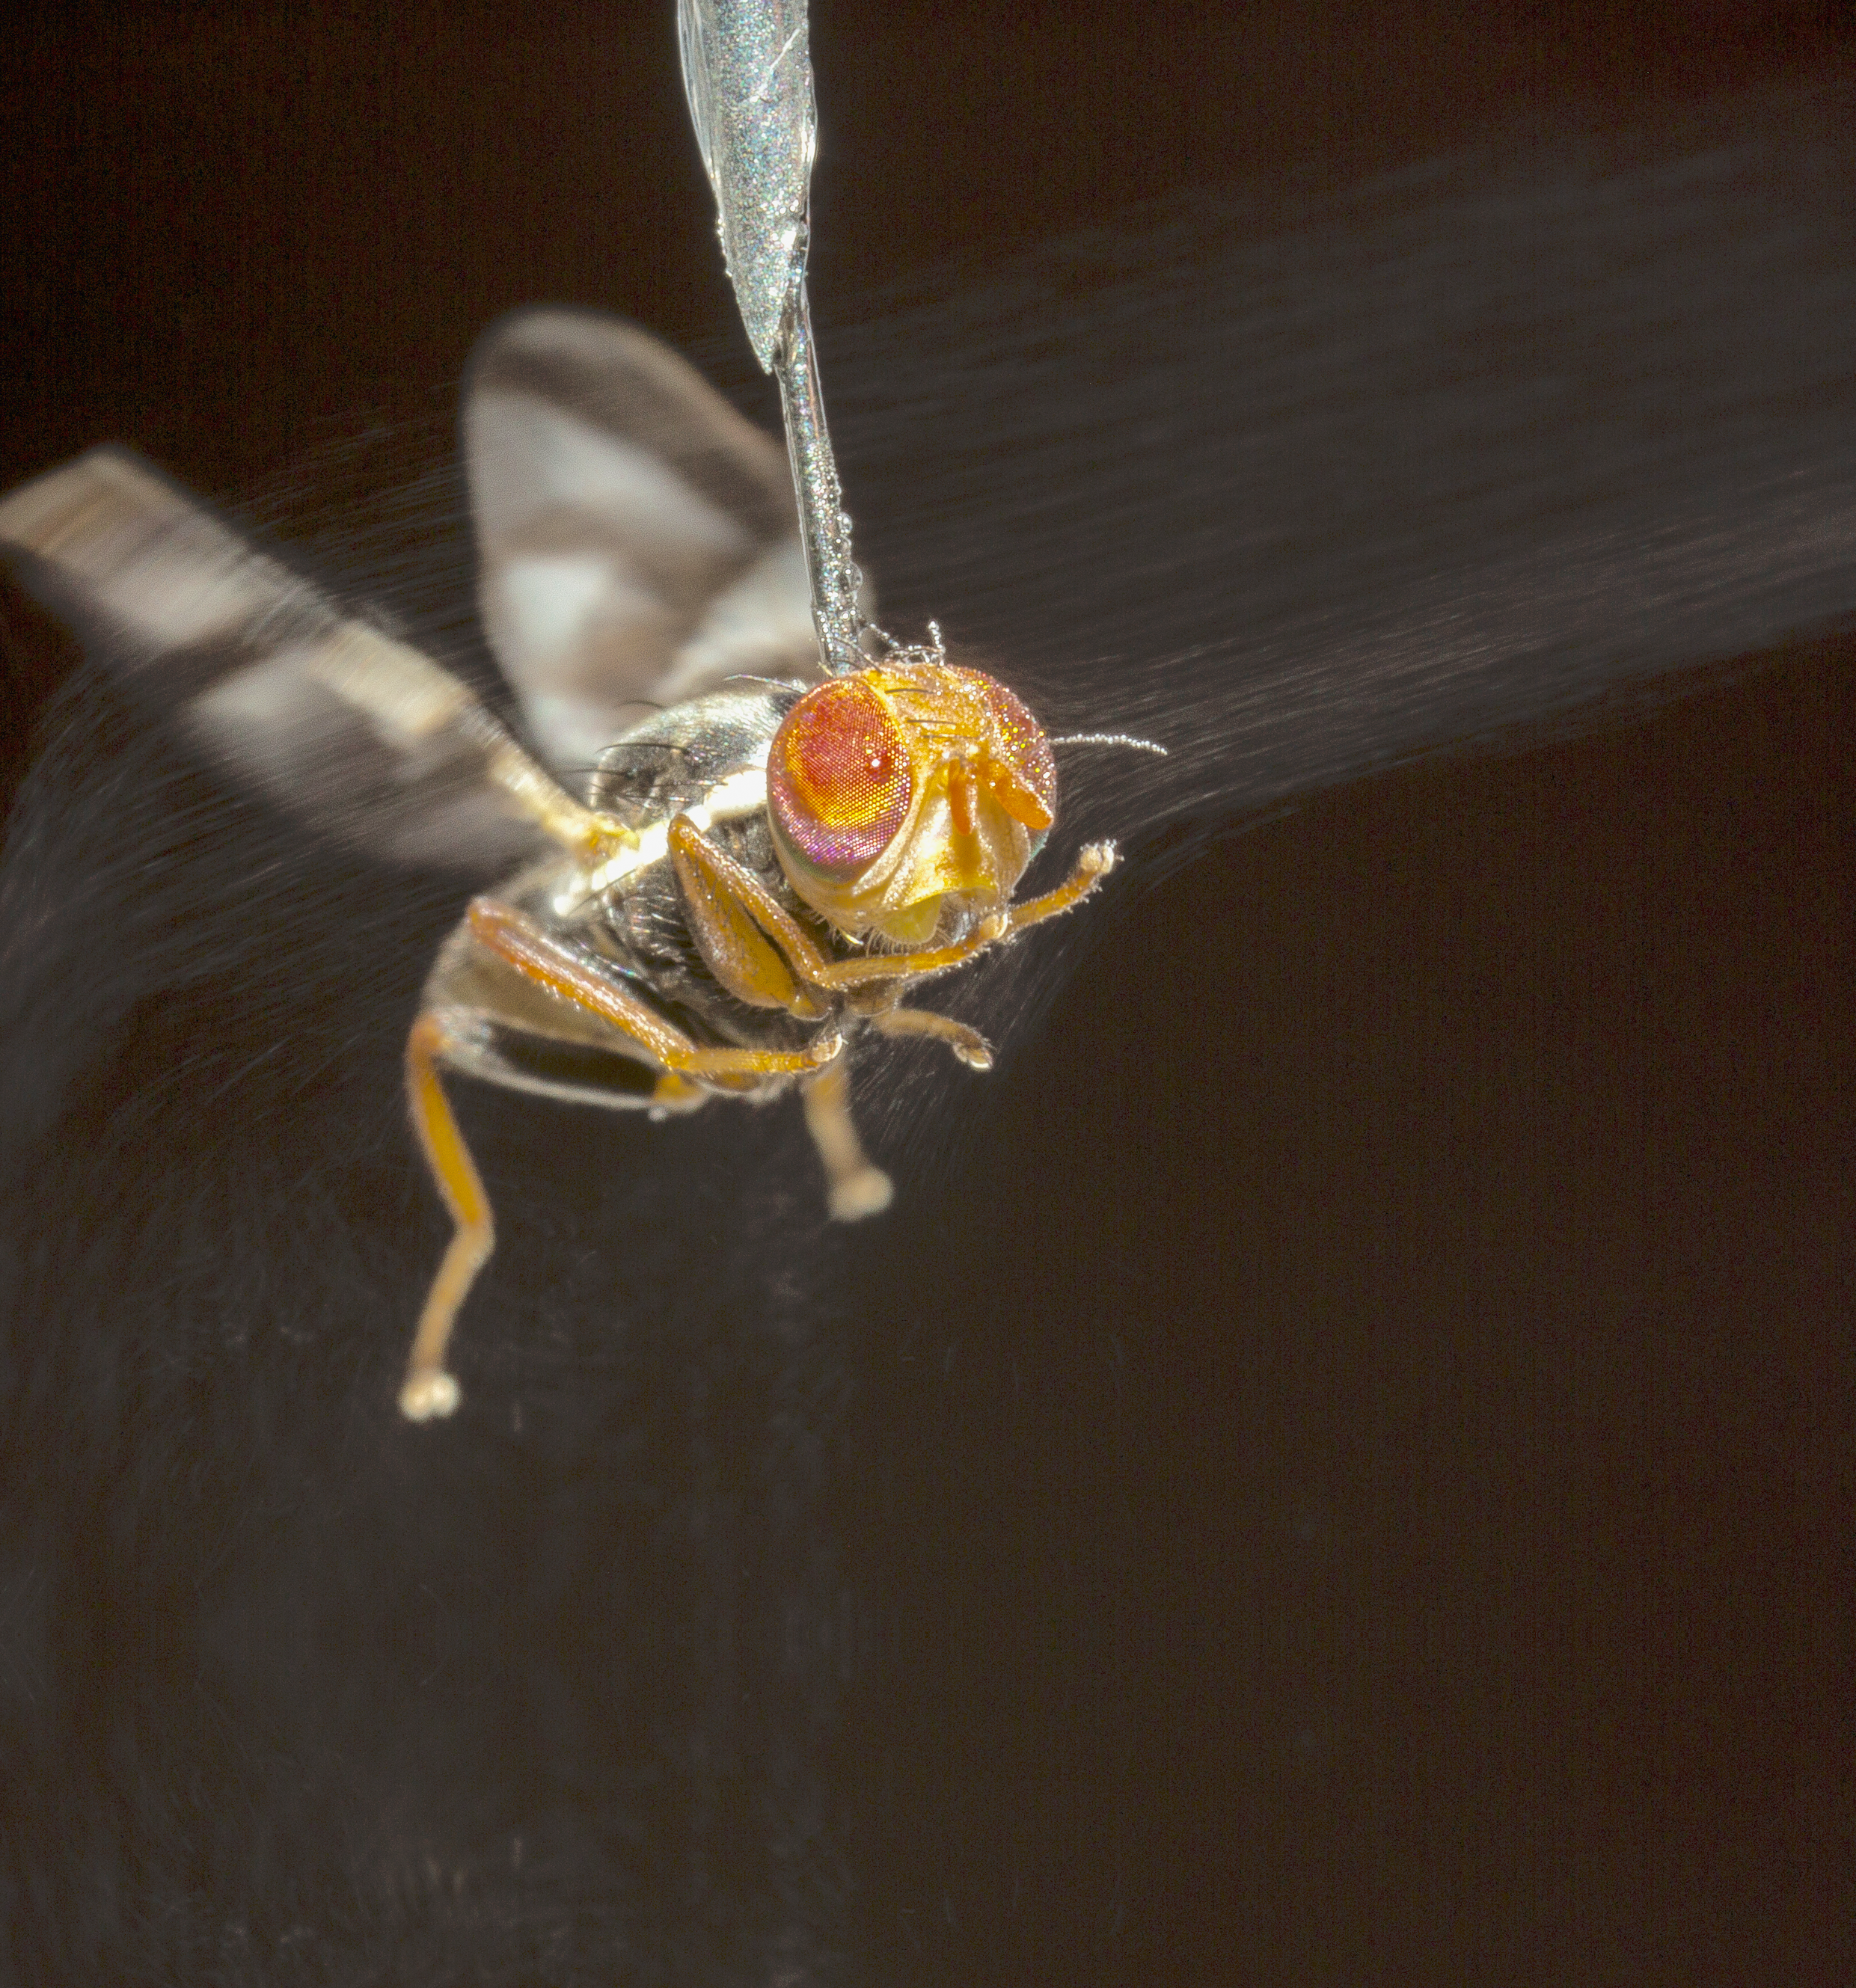 Insect virtual reality: What it’s really like to be the fly on the wall